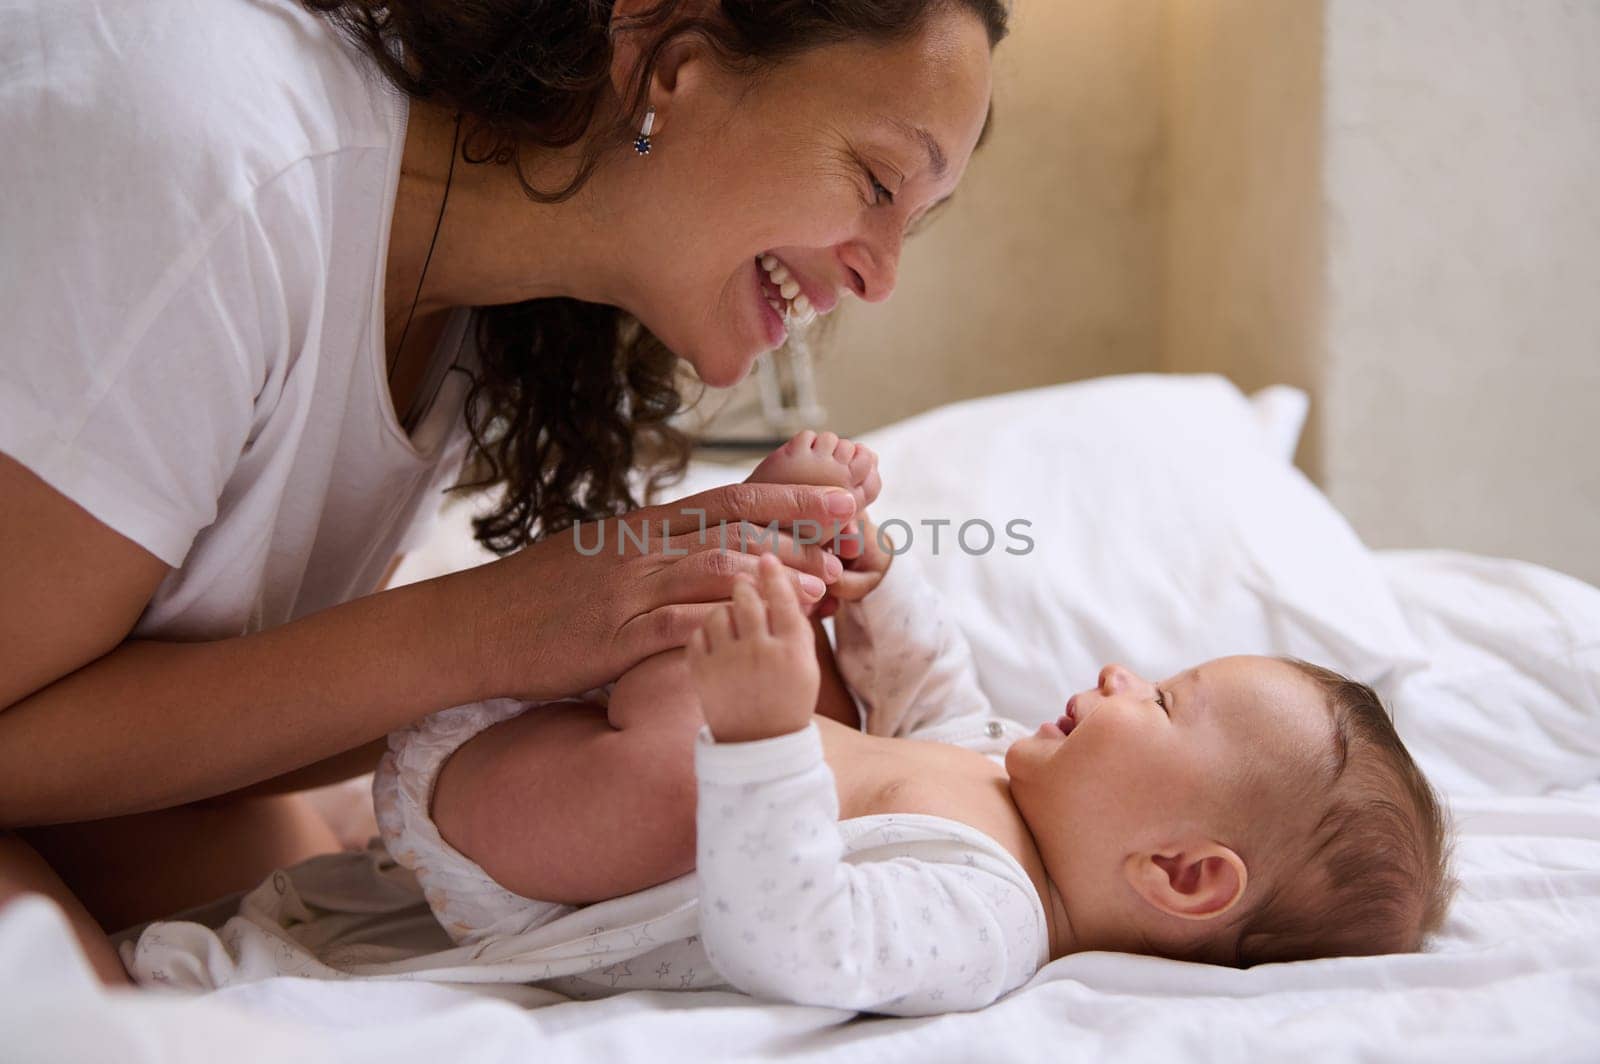 Young loving mother holding legs of her baby near her face, smiling and looking tenderly at him while kissing him by artgf